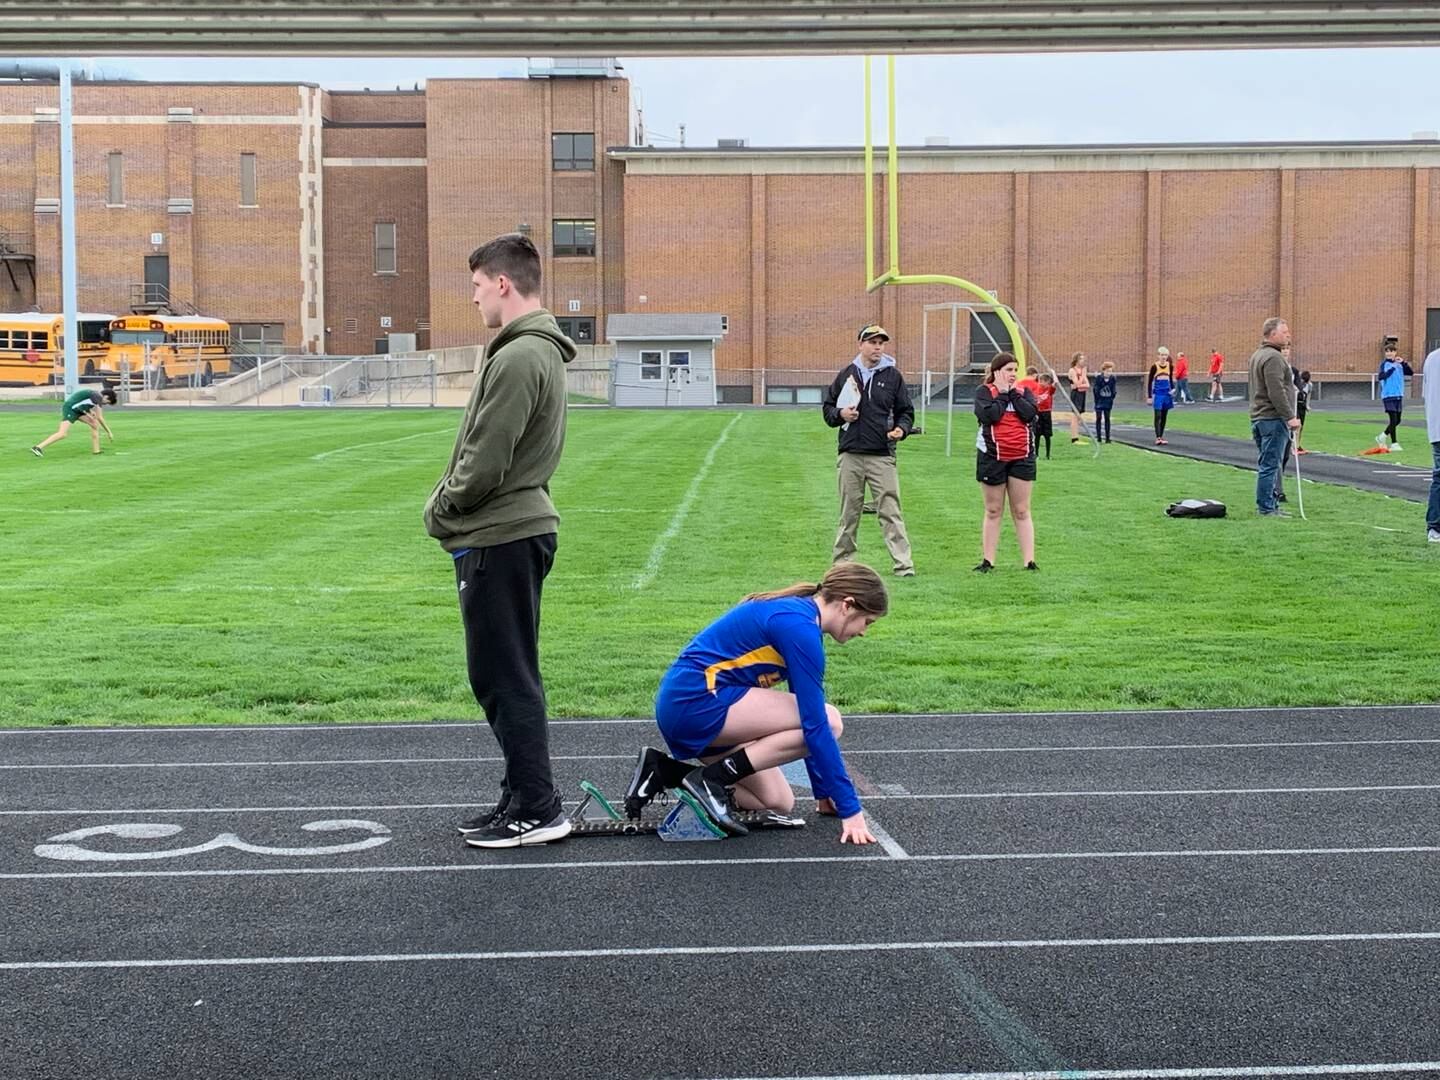 Princeton Logan 8th grader Camryn Driscoll gets a help from her brother, Evan, on the starting blocks in Monday's Bureau County meet. She won both the 100 and 400 meter dashes.